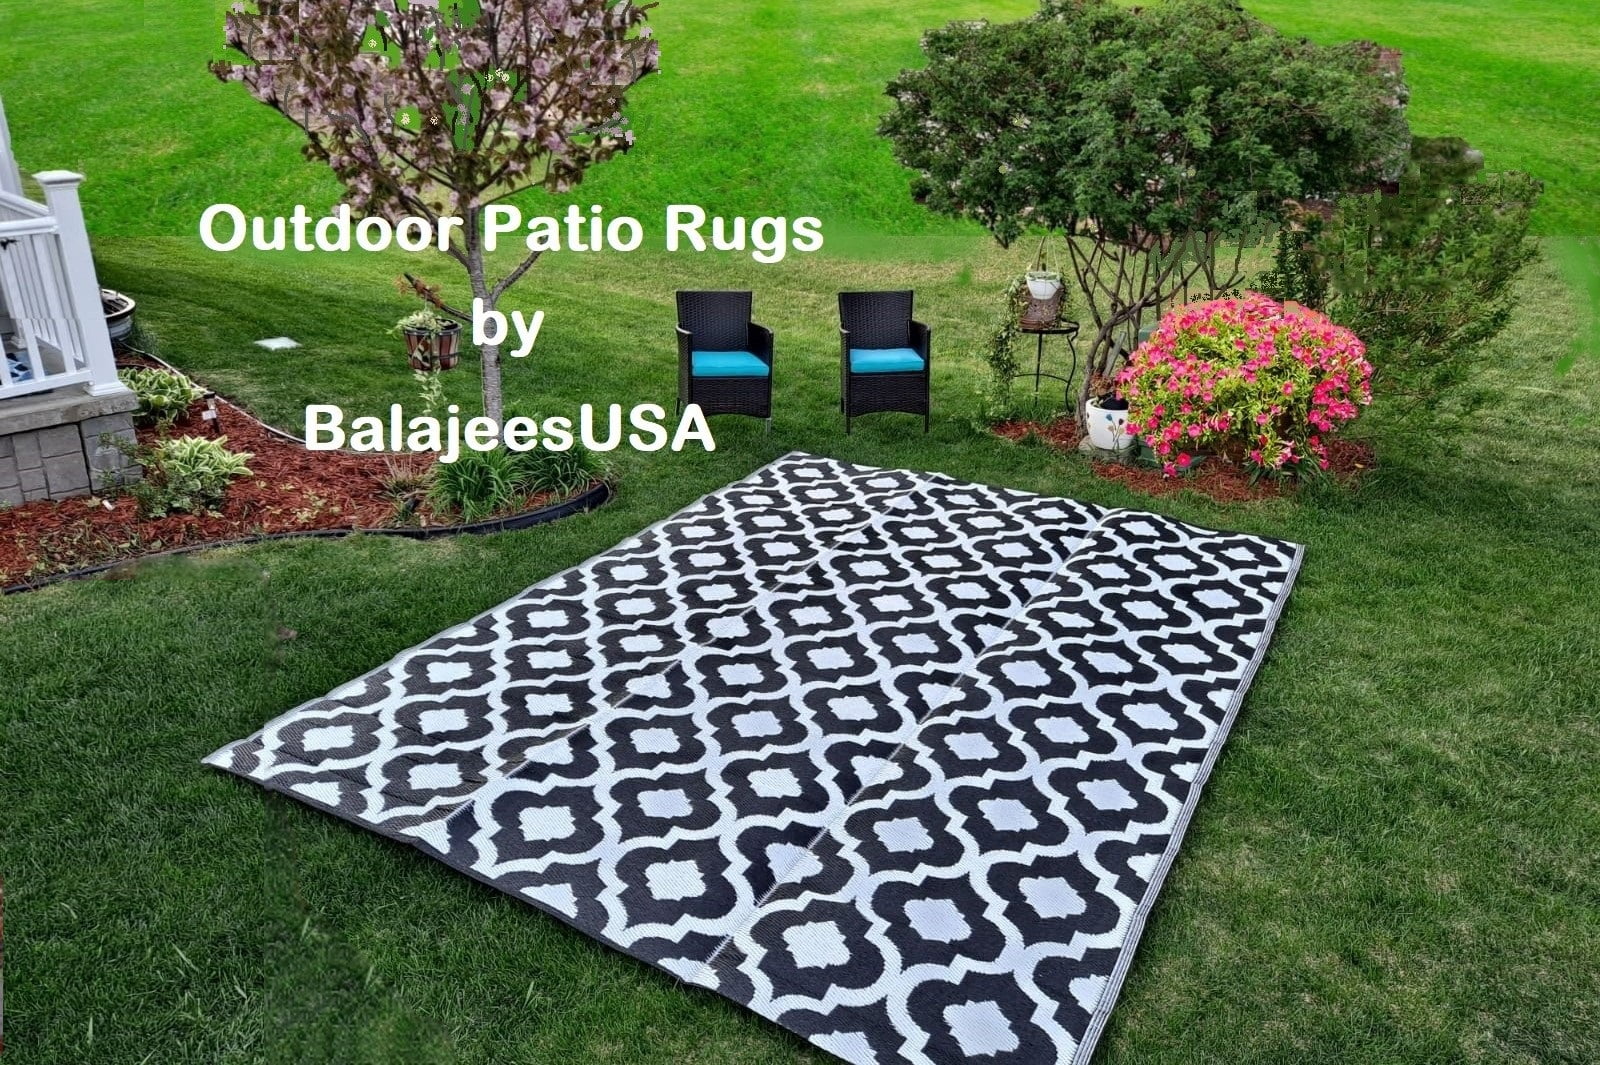 Outdoor Entryway Mats – Consolidated Plastics